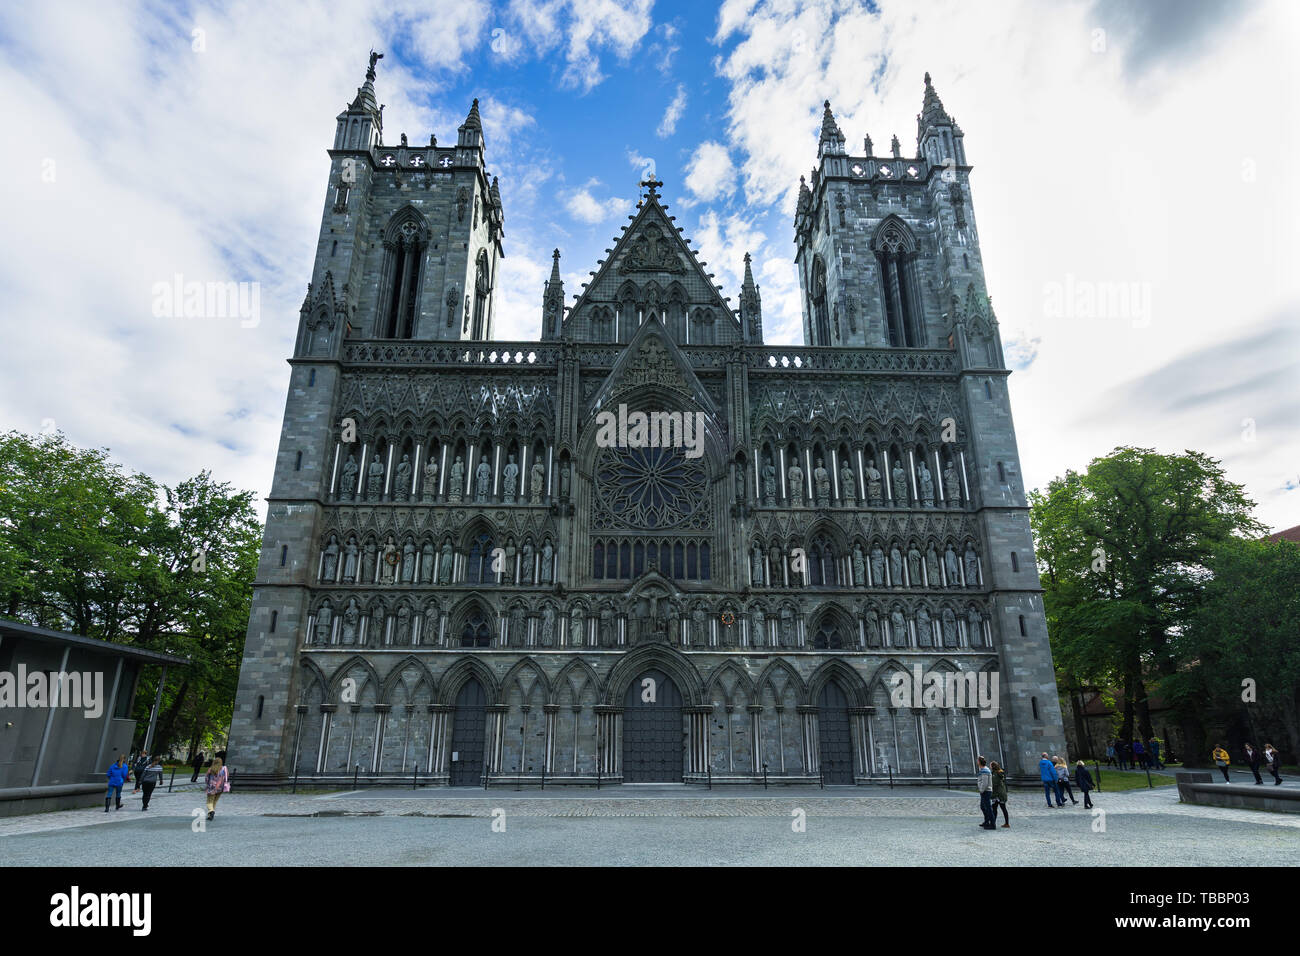 Finely decorated Gothic facade of Nidaros Cathedral (Nidaros Domkirke), the most famous landmark of Trondheim. Trondheim, Norway, August 2018 Stock Photo